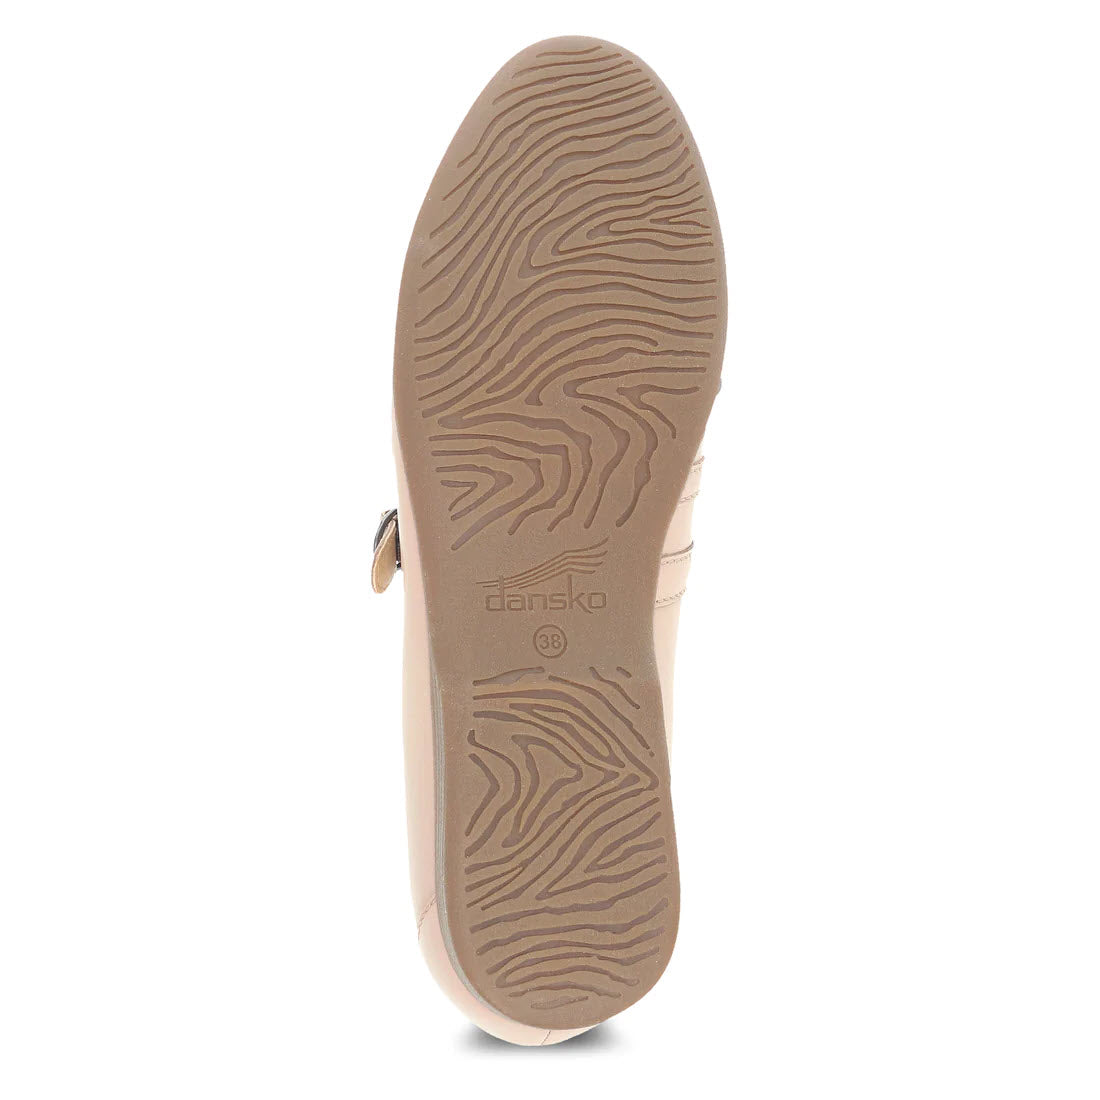 Sole of an elegant supportive beige Dansko Leeza Ballet shoe displaying the brand logo and size, with a patterned tread and a visible side zipper.